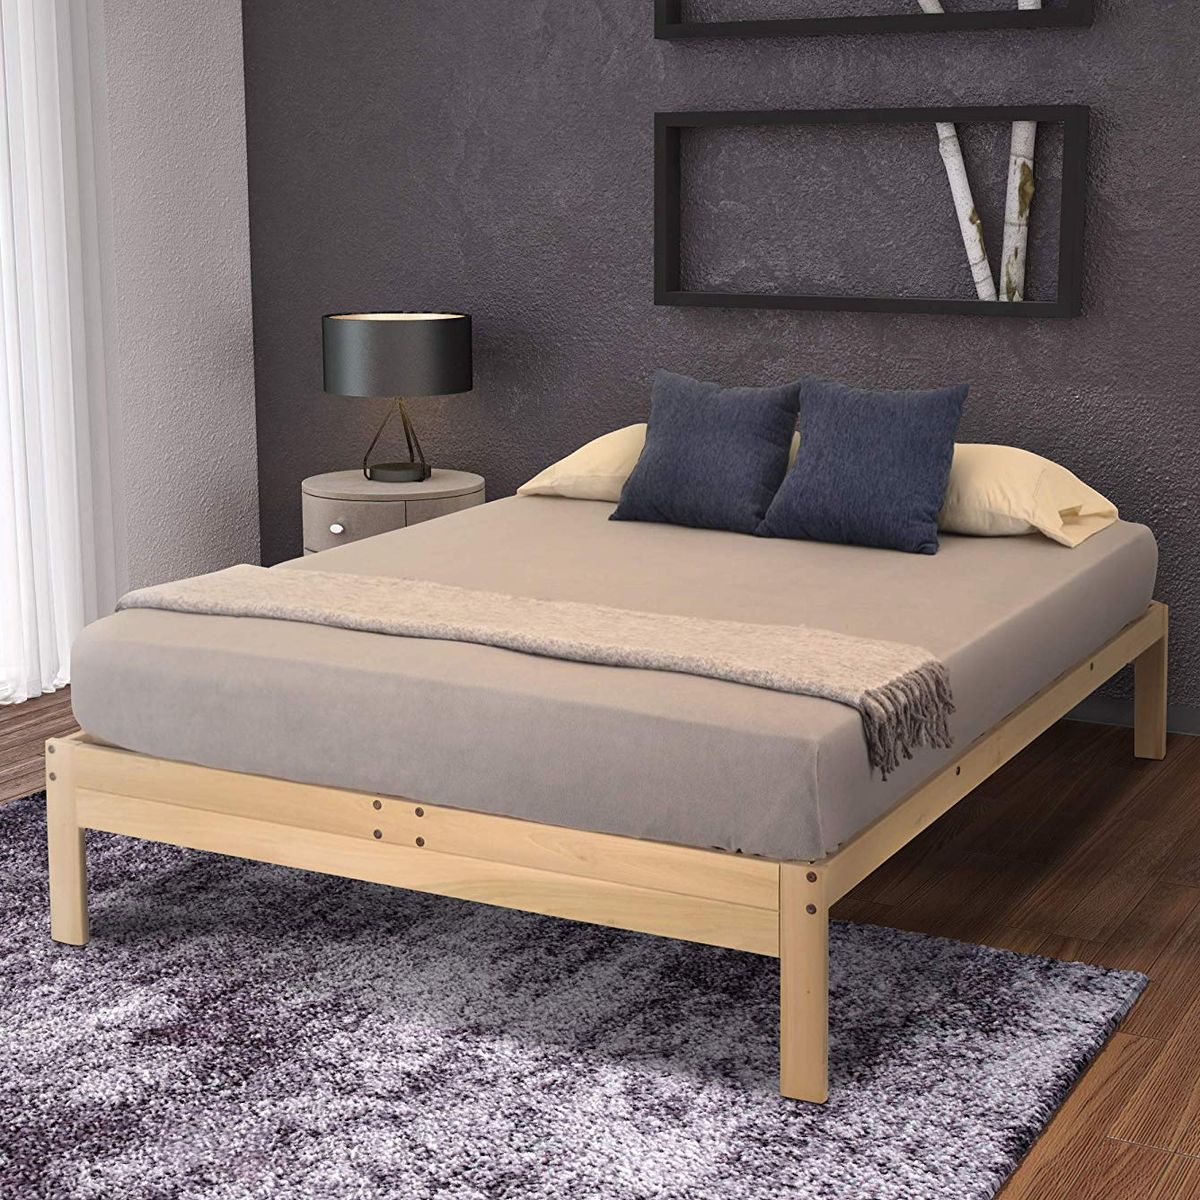 23 Best Bed Frames 2021 The Strategist, What Is The Best Type Of Bed Frame